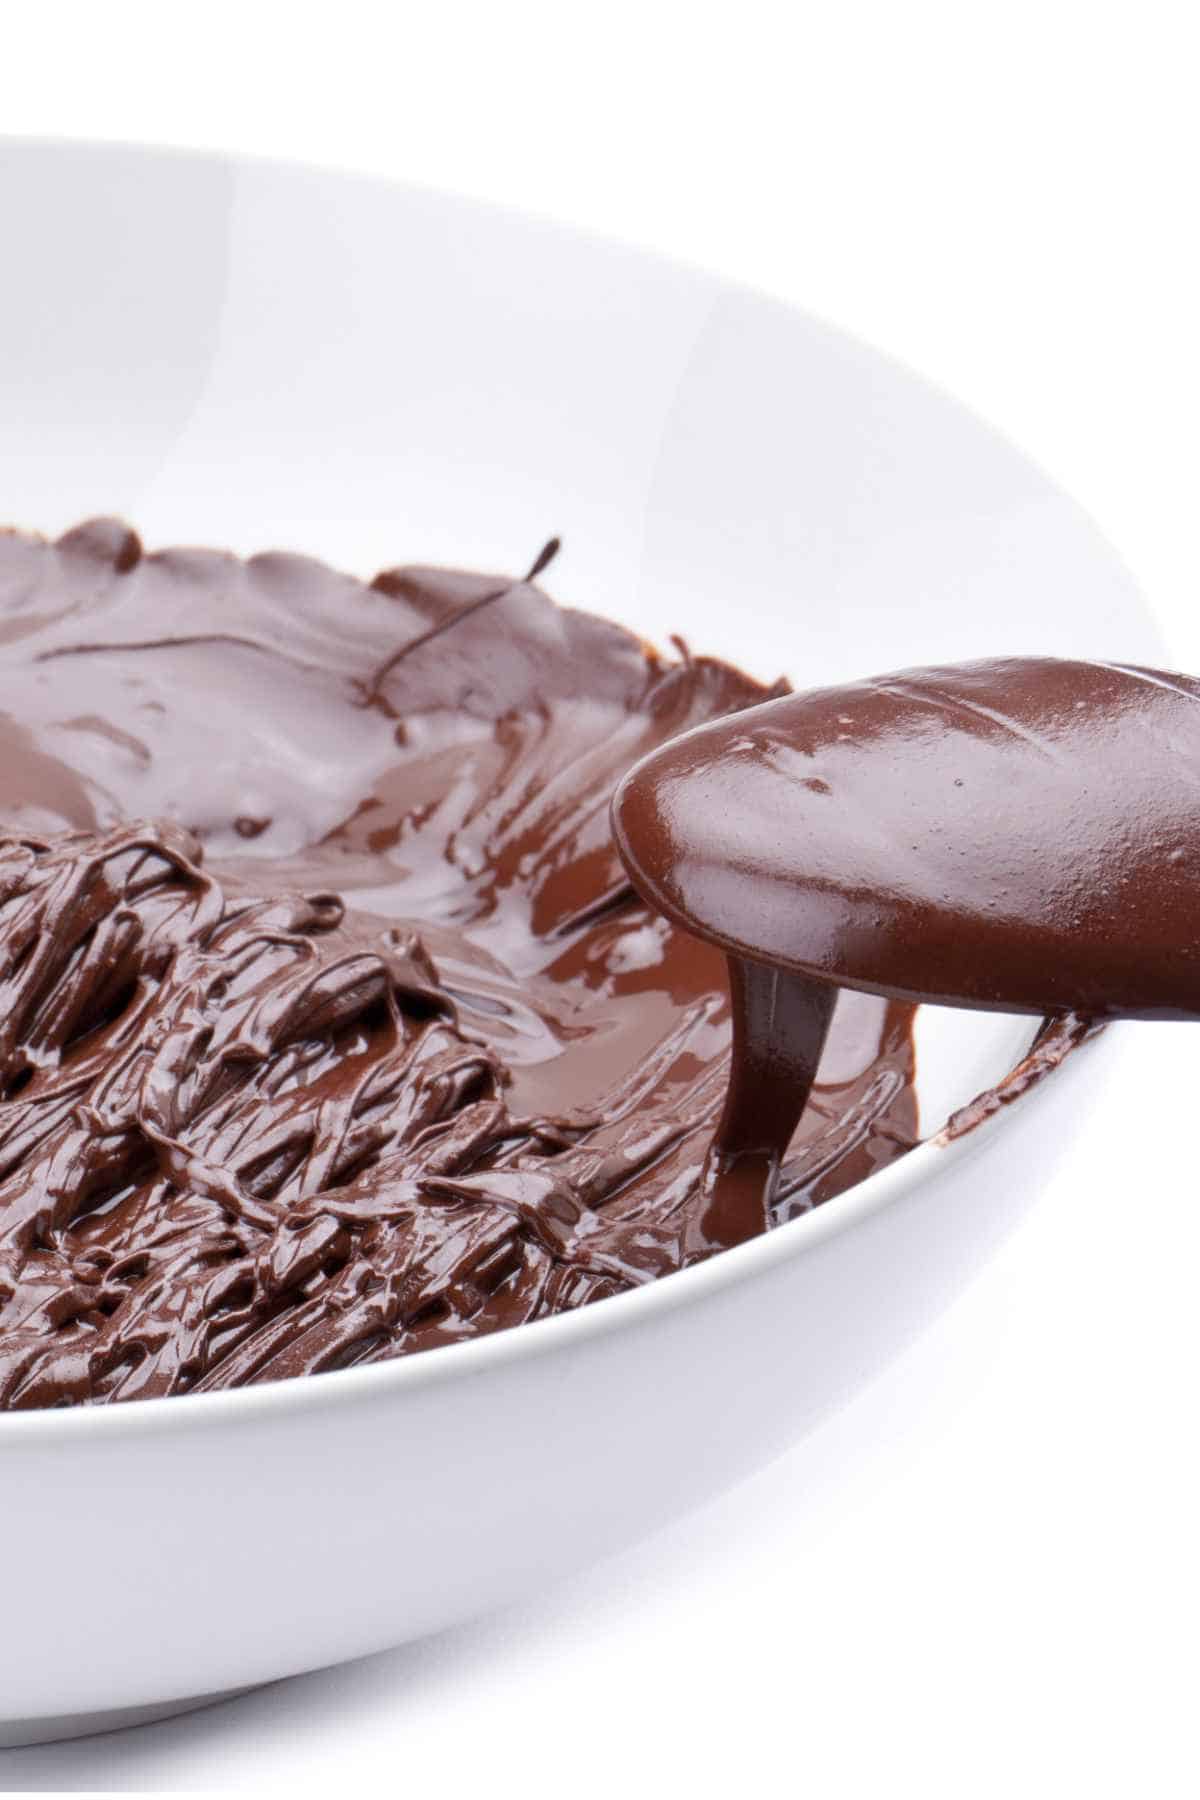 A bowl of chocolate sauce with spoon on a white background.